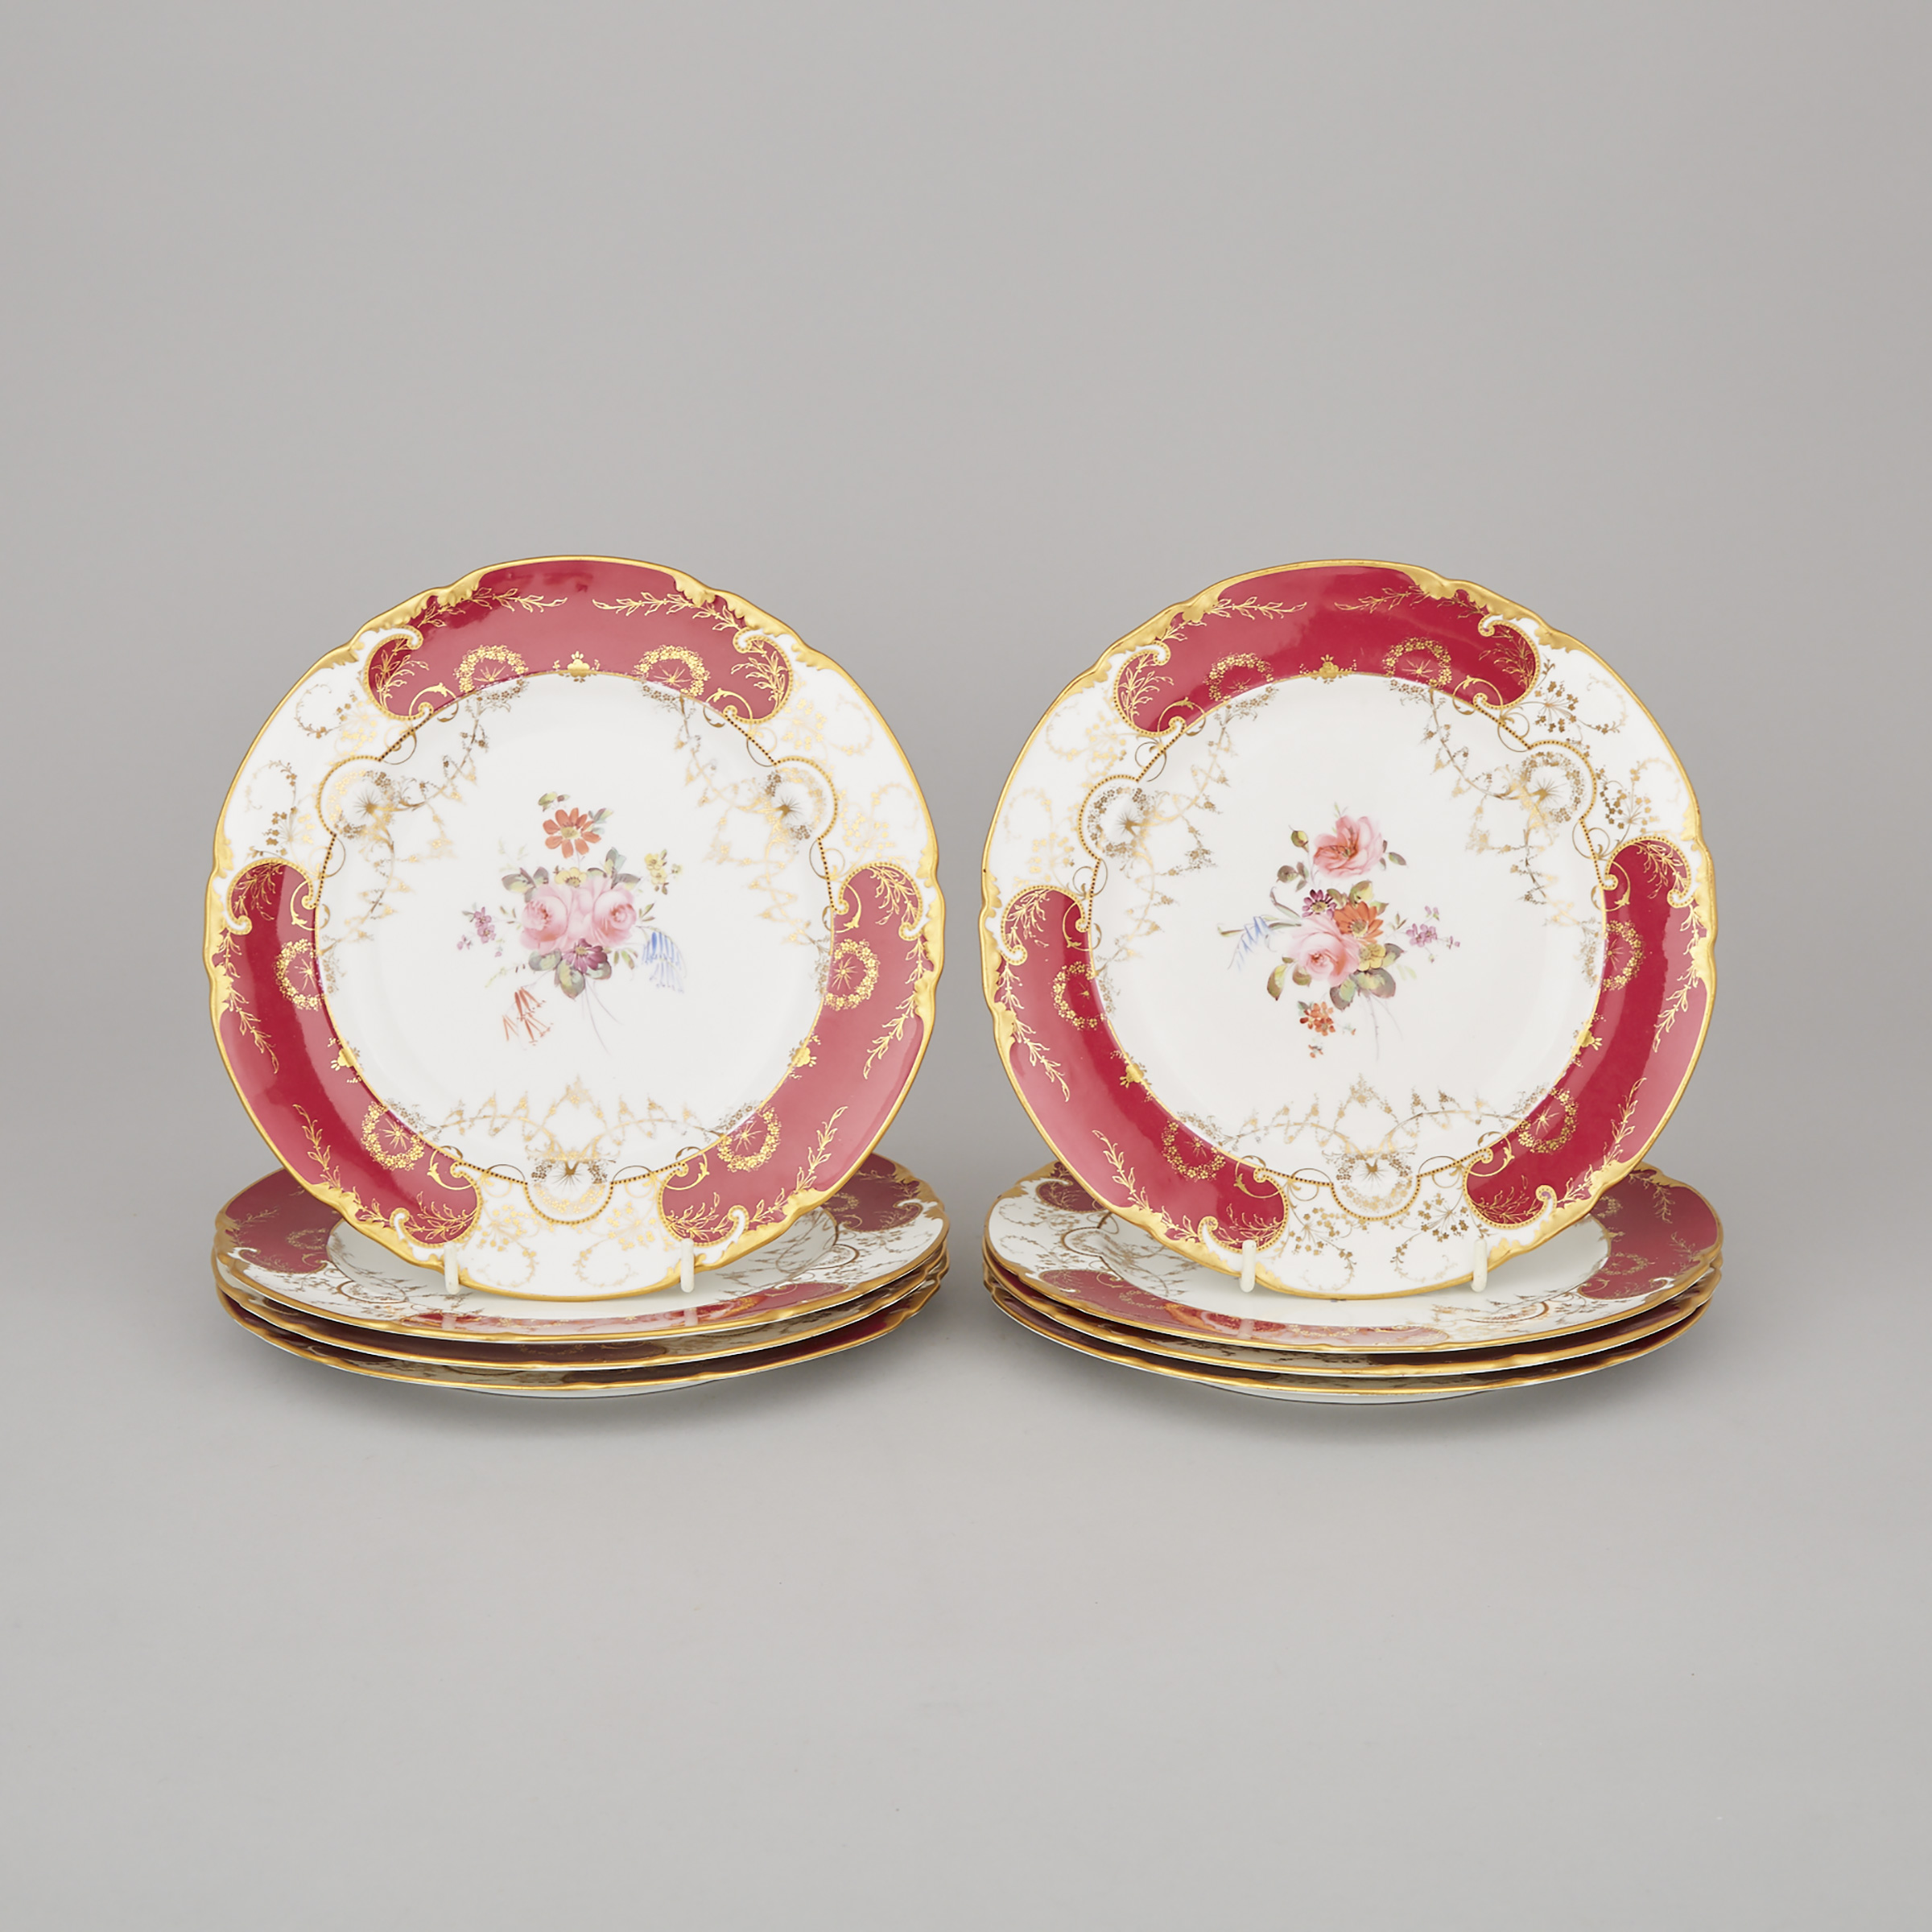 Eight Royal Crown Derby Floral Decorated Claret and Gilt Ground Plates, c.1928-30